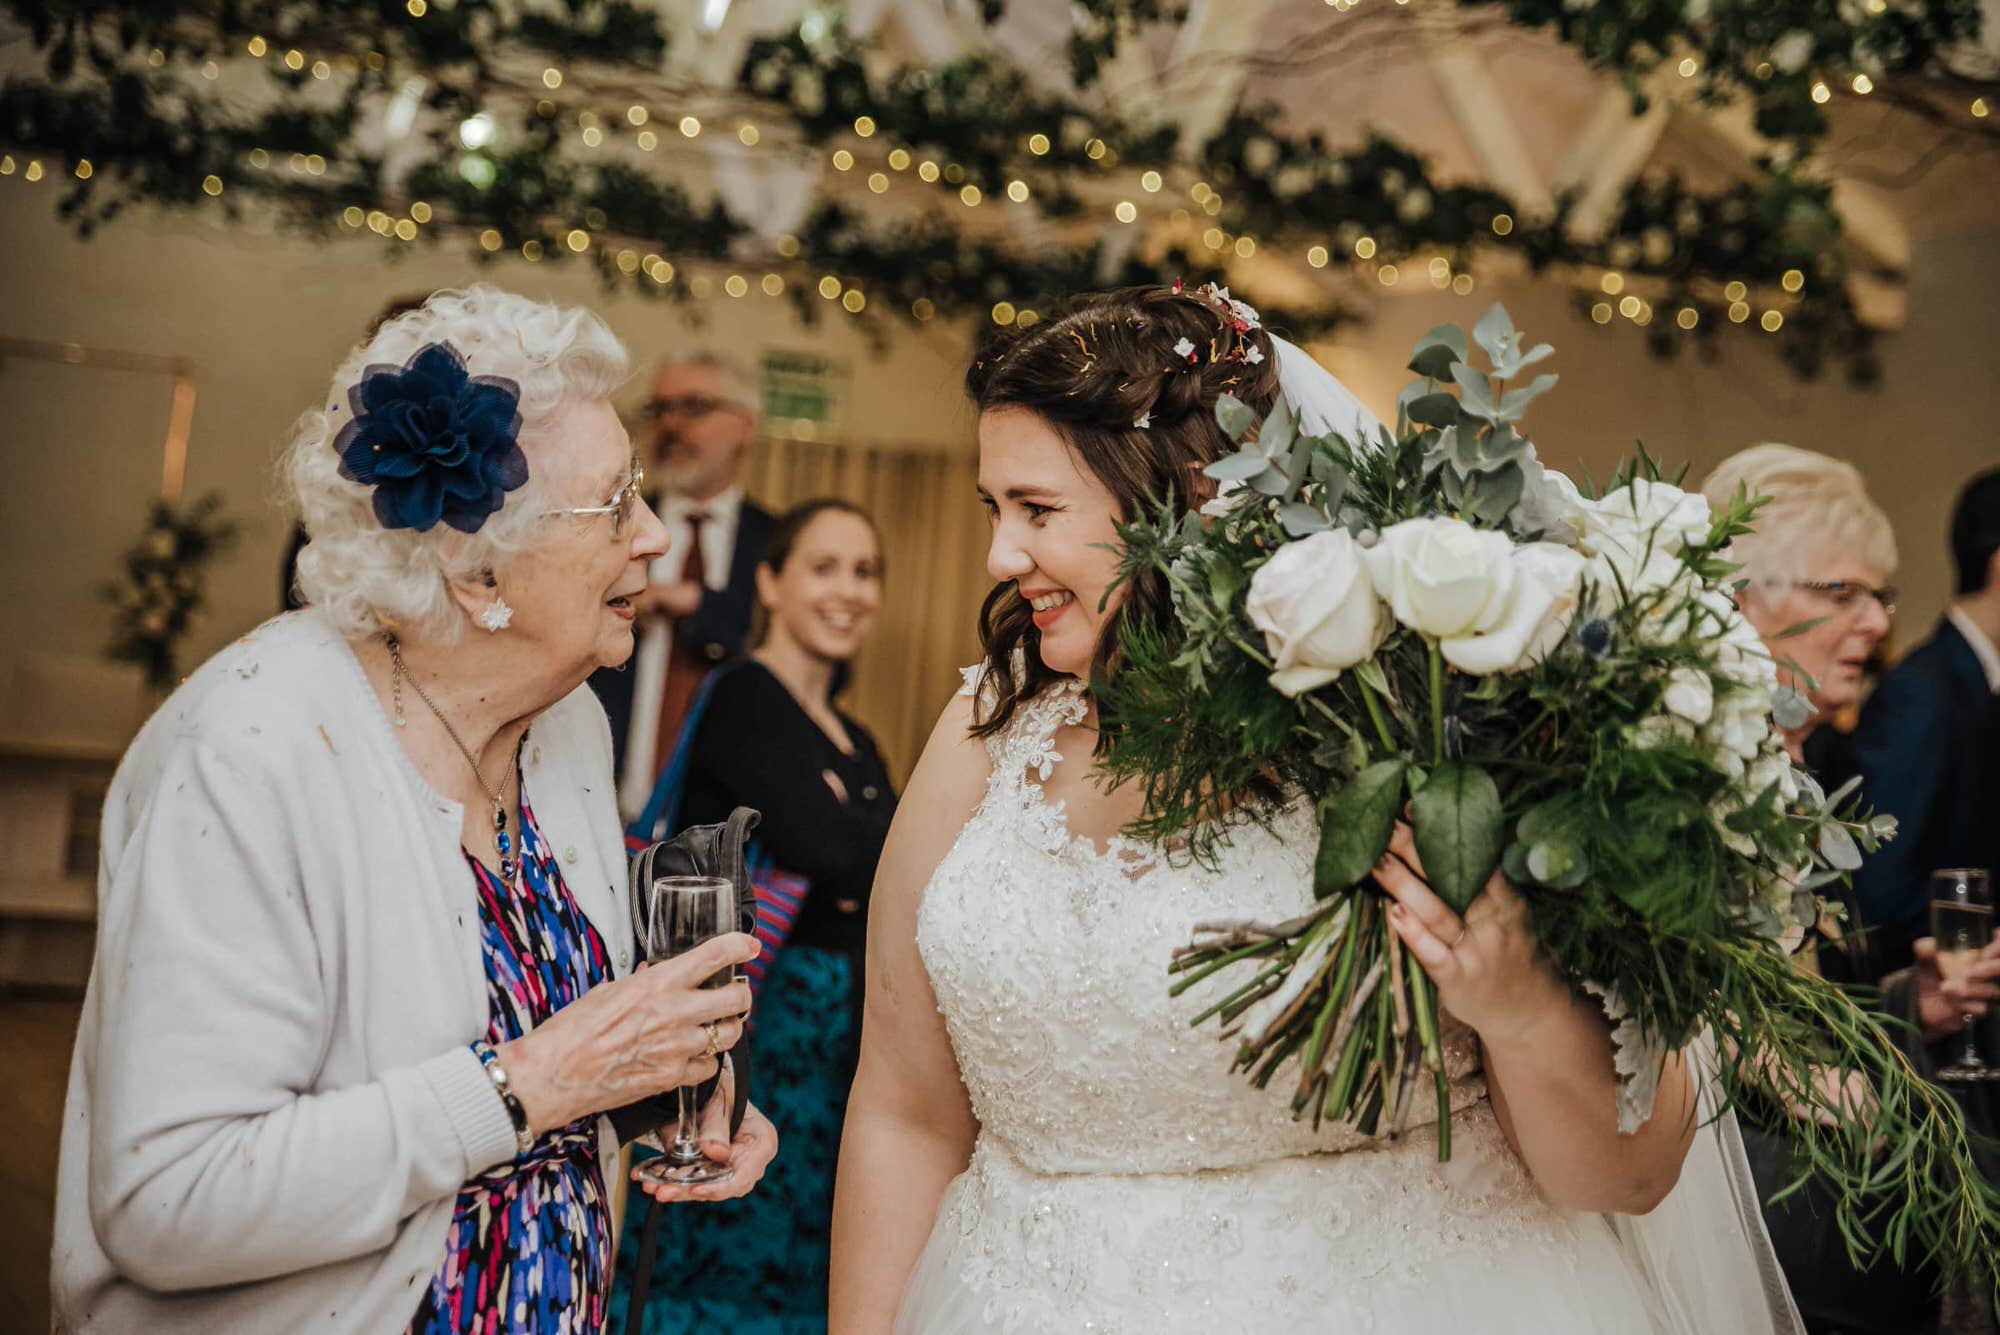 Lizzie and Gareths wedding at The Milling Barn, Bluntswood Hall, Throcking Roshni Photography